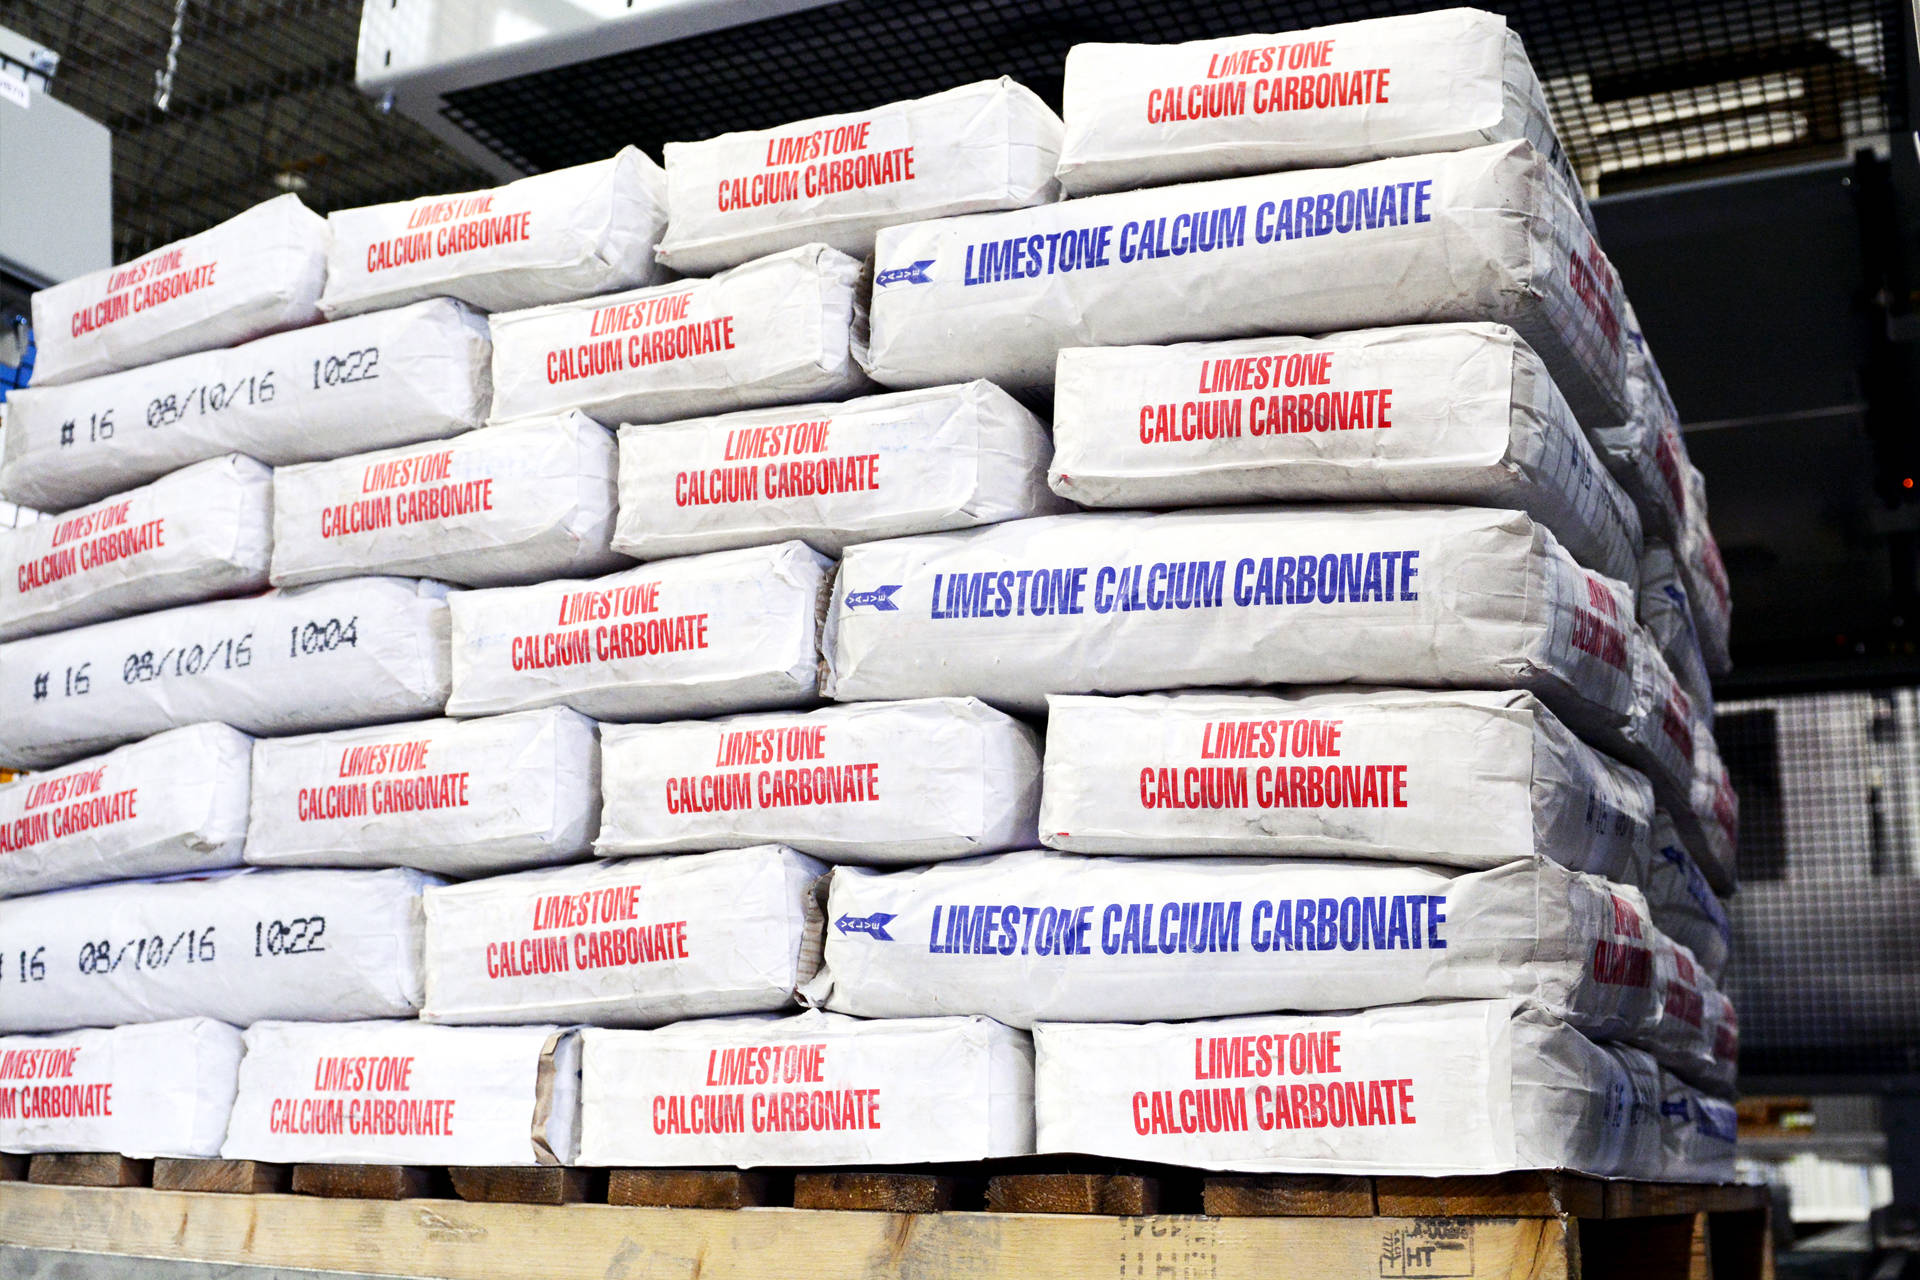 Limestone calcium carbonate bags stacked on a pallet